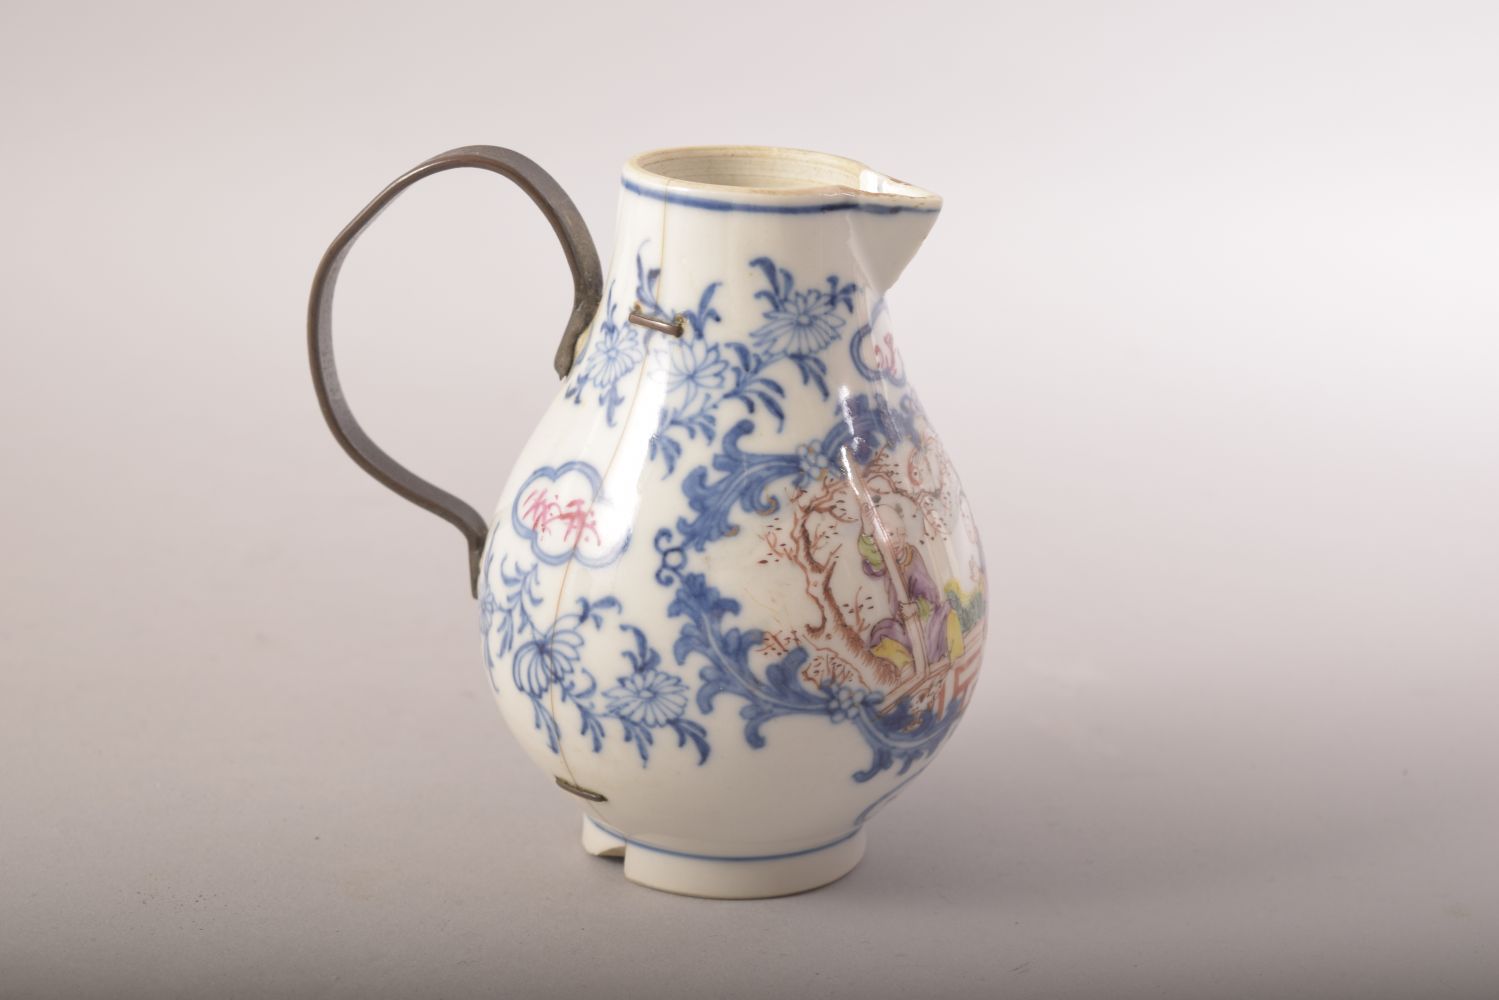 A SMALL CHINESE PORCELAIN JUG, painted with a panel of figures, mounted metal handle, (af), 11cm - Image 3 of 6